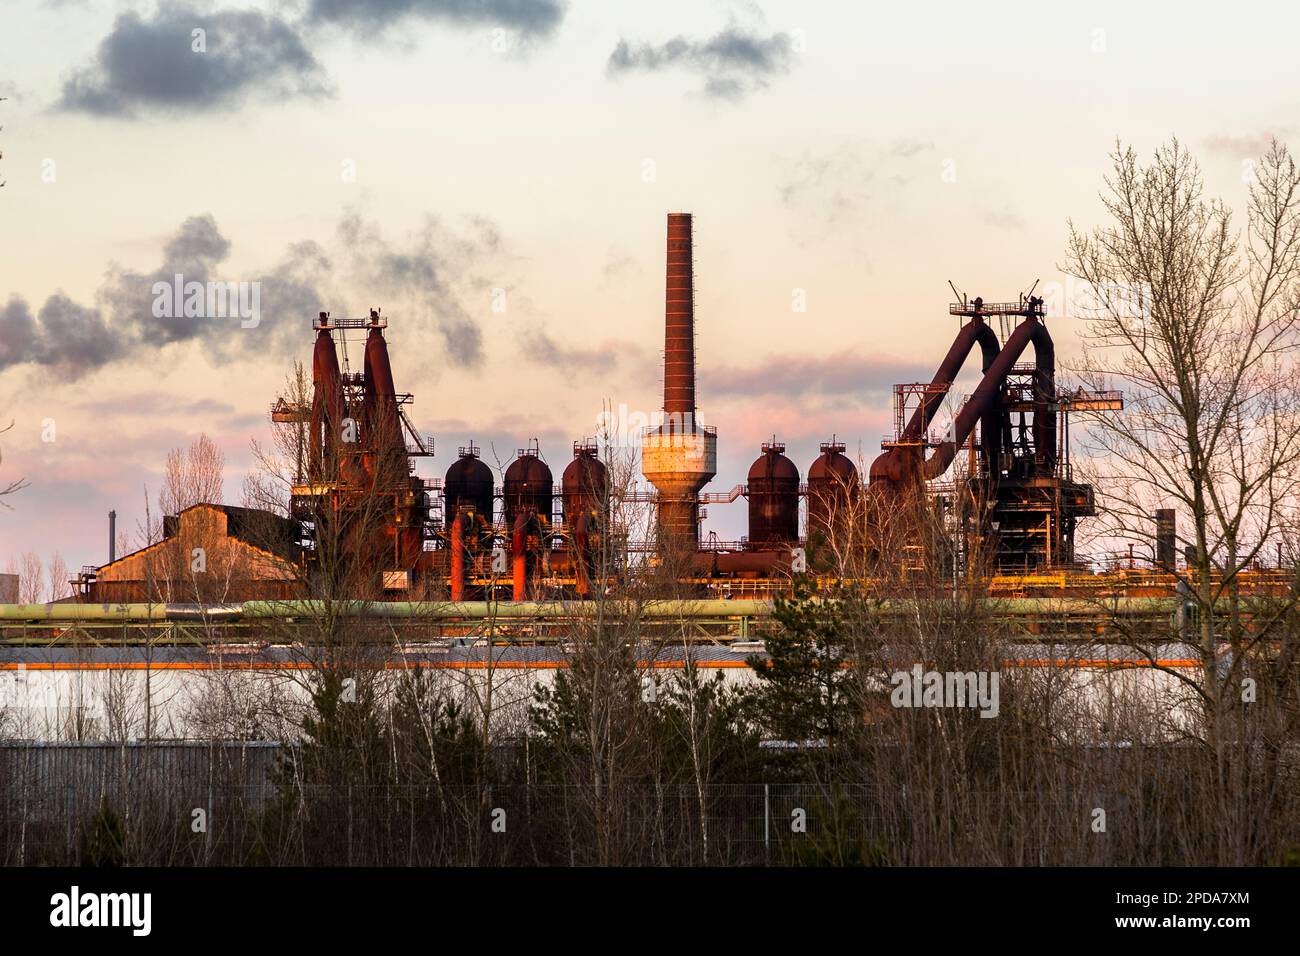 Ironworks in Eisenhüttenstadt (formerly Stalinstadt). The planned city has no church spires. The blast furnace is one of the tallest structures. As a central place of work, visual axes and main streets were aligned to the steel mill during planning in the early 1950s. The former EKO (Eisenhütten Kombinat Ost) steel factory of ArcelorMittal in Eisenhüttenstadt, Germany Stock Photo